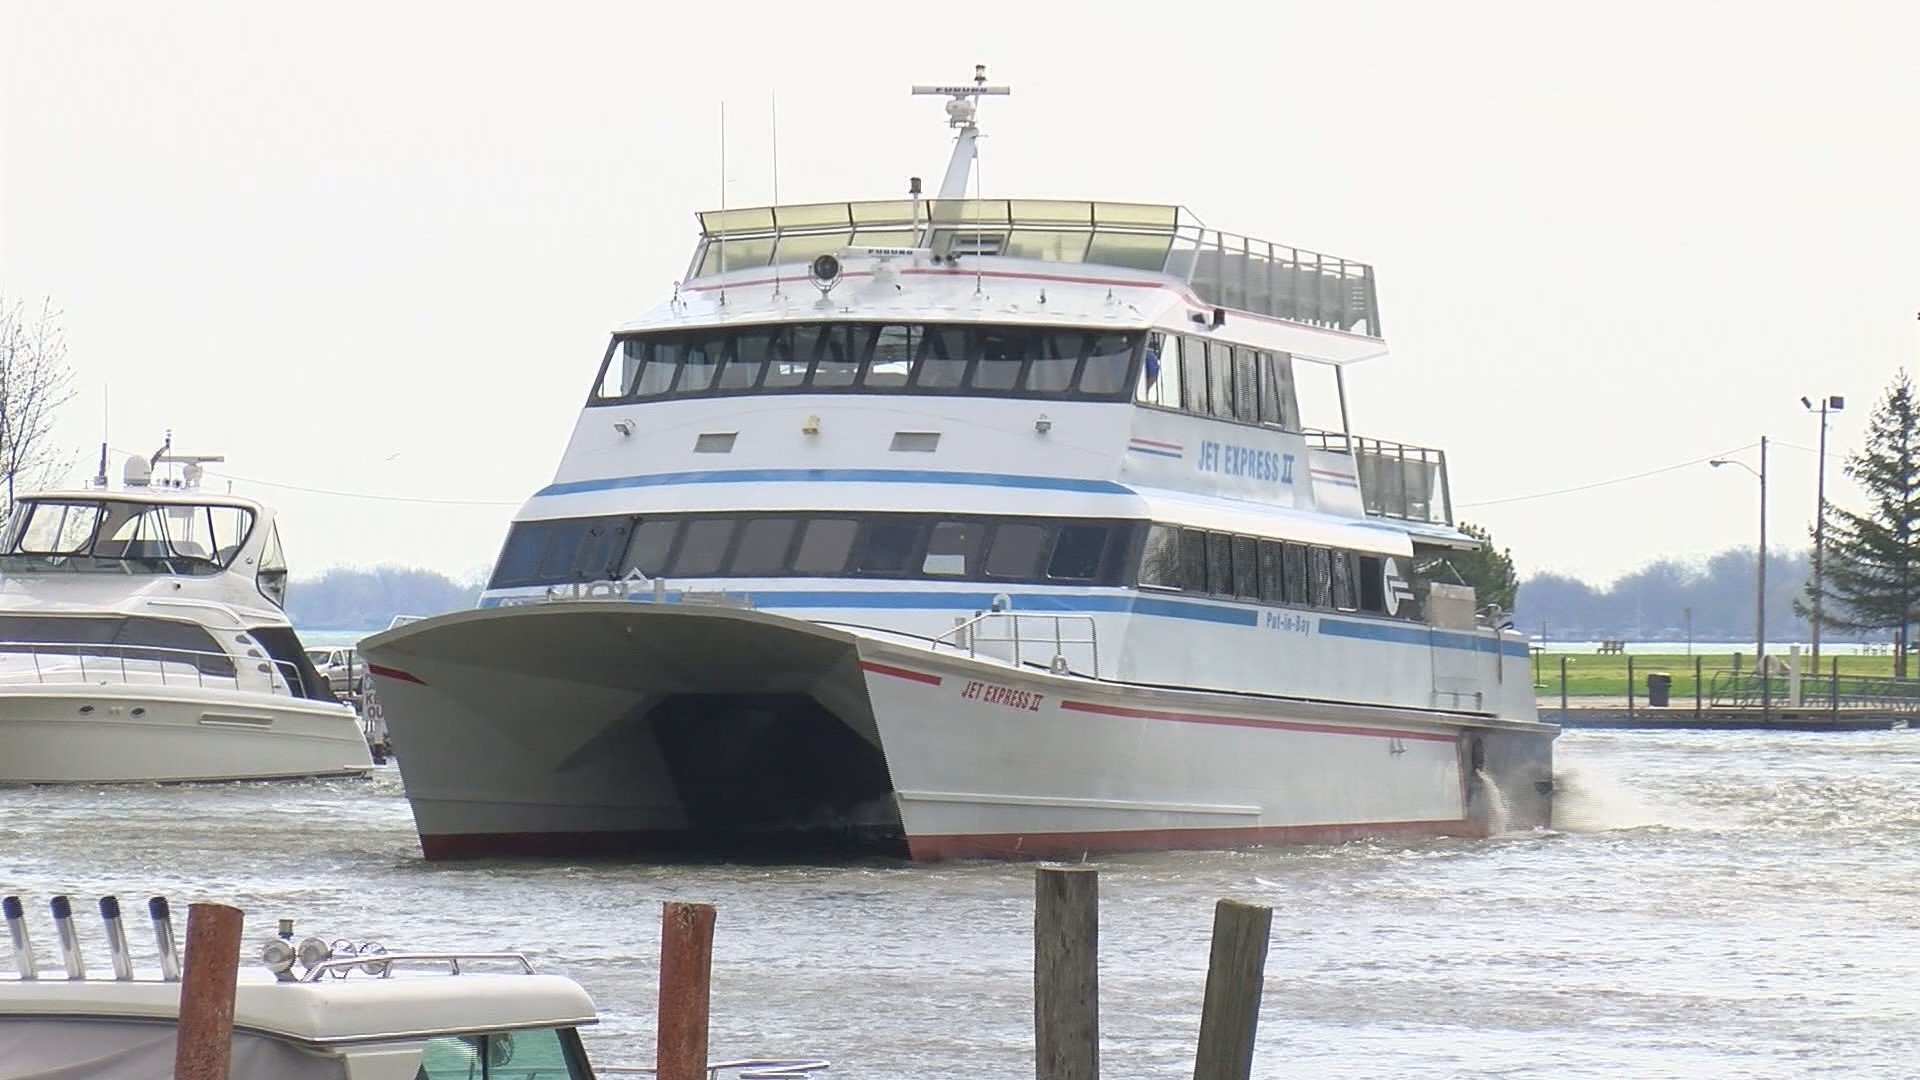 Service will continue from Port Clinton to Put-in-Bay only, until October 25th.